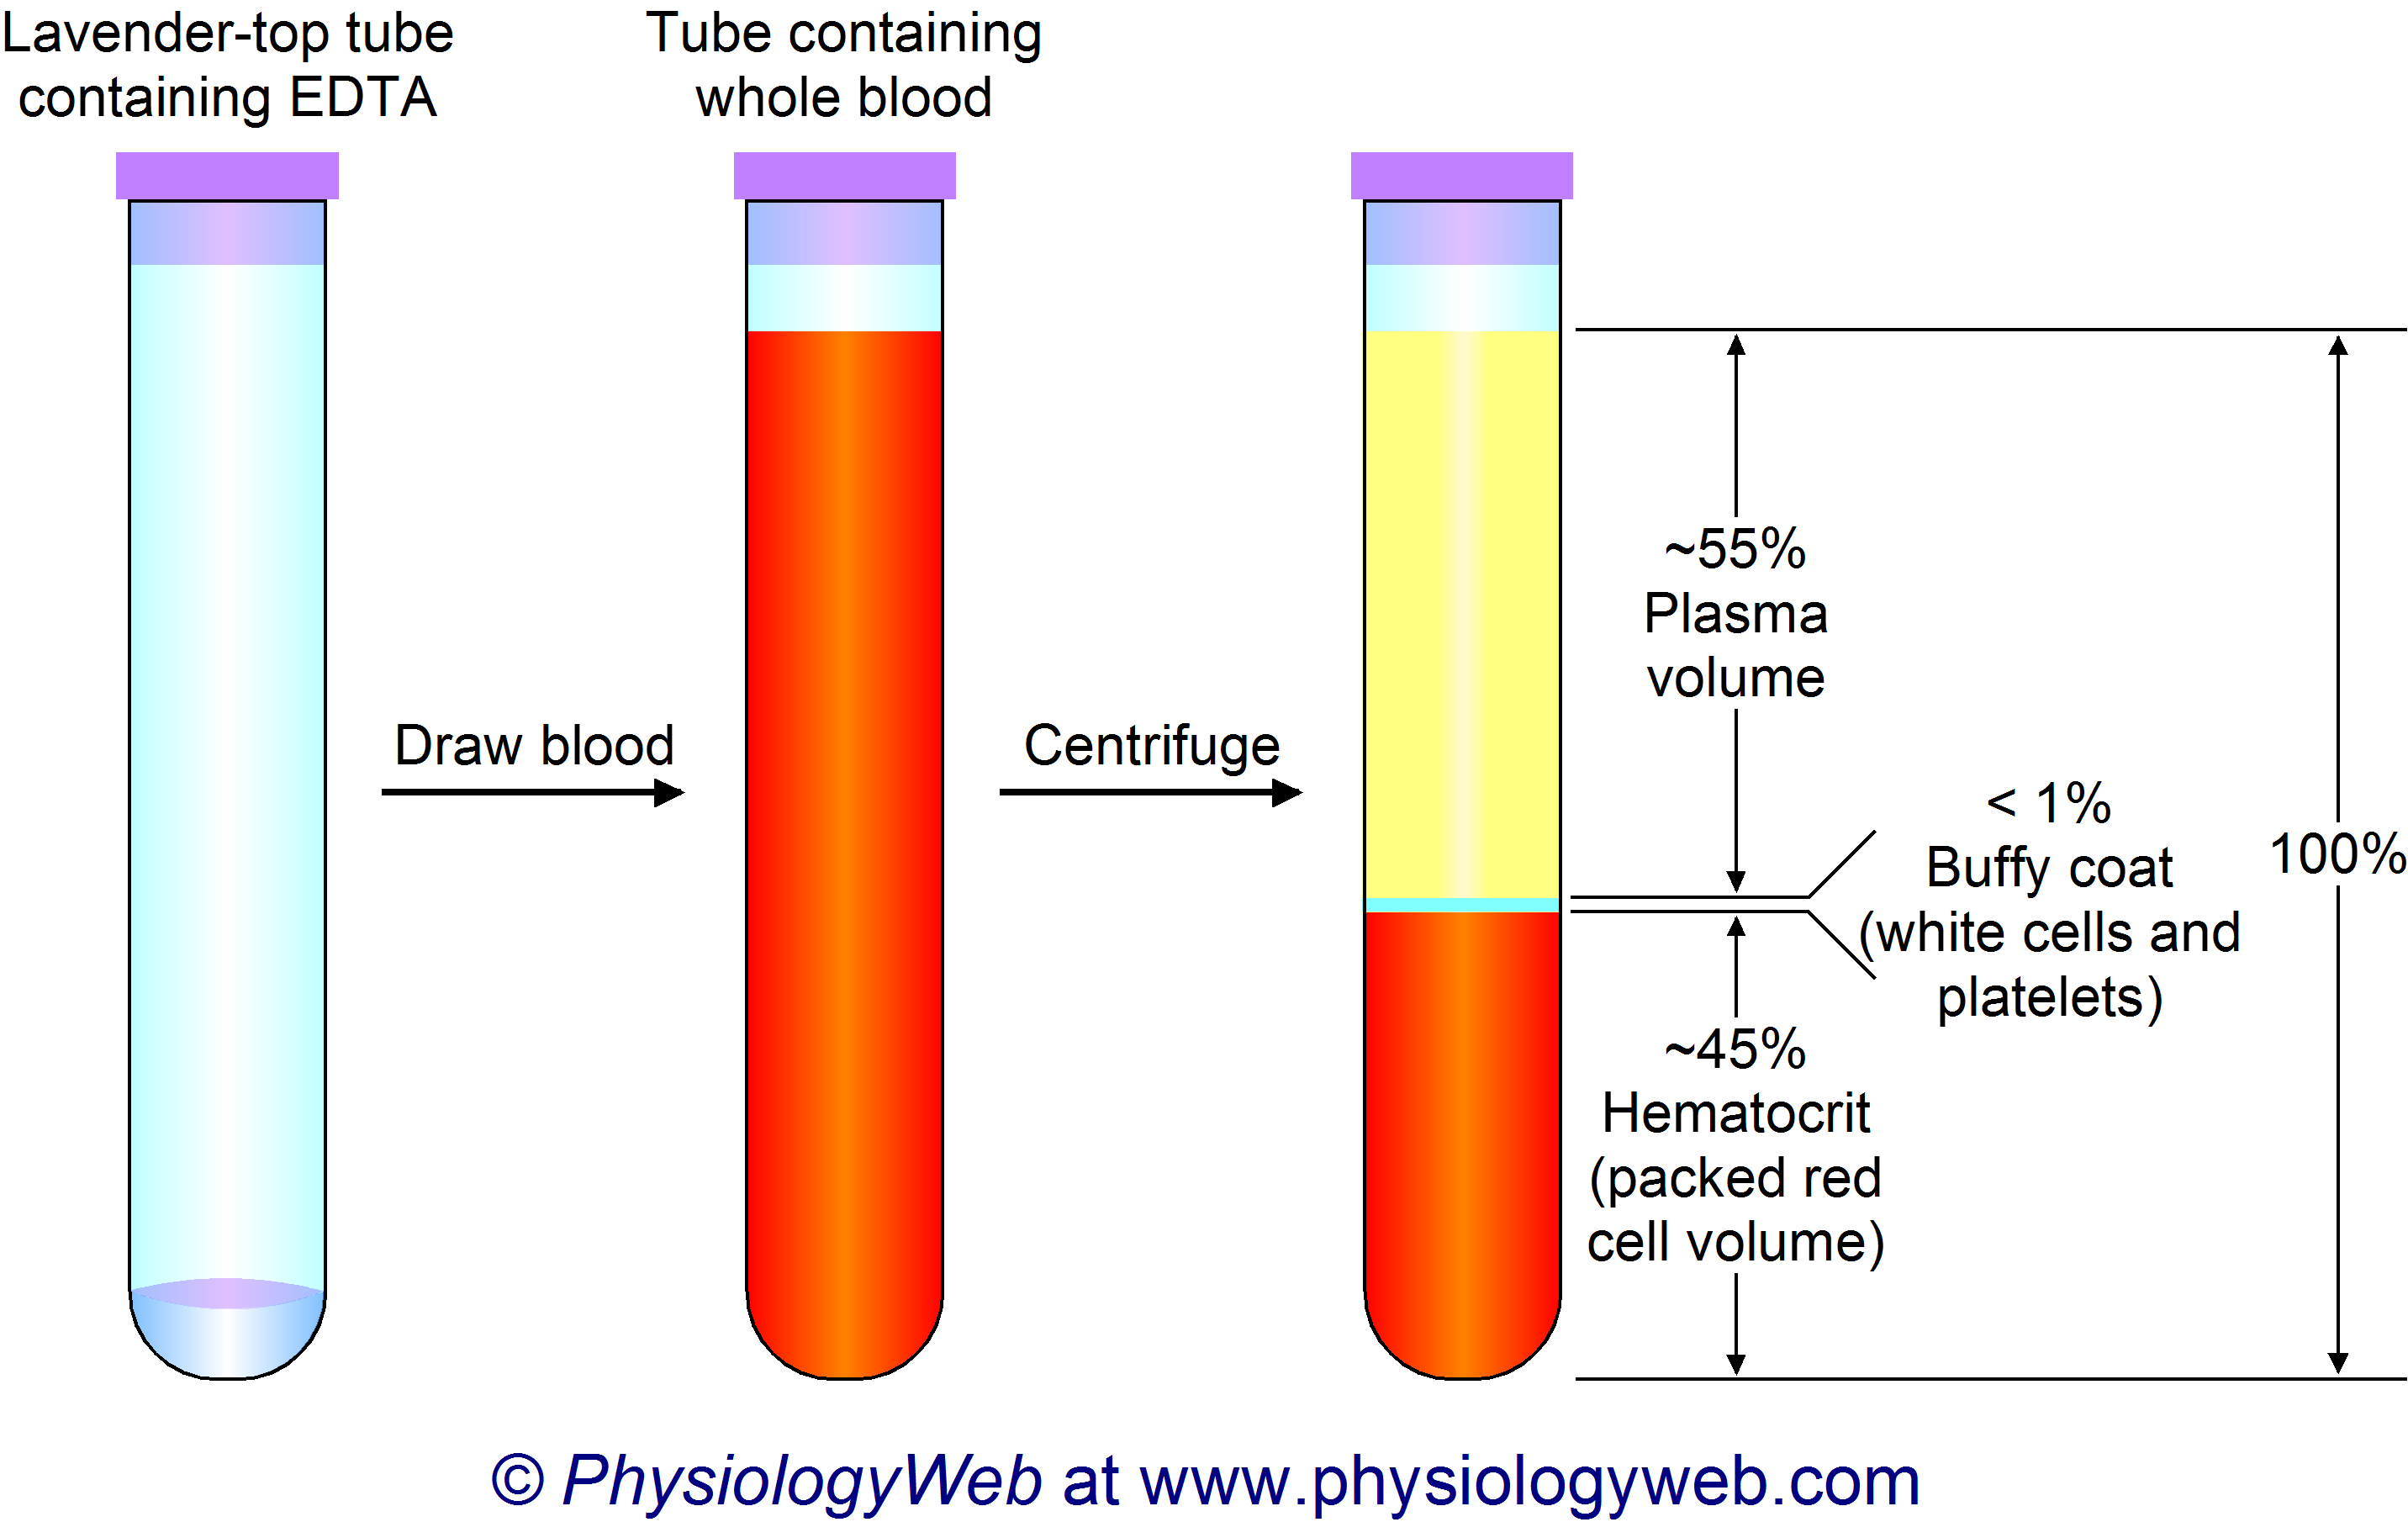 Whole blood is composed of plasma and formed elements.